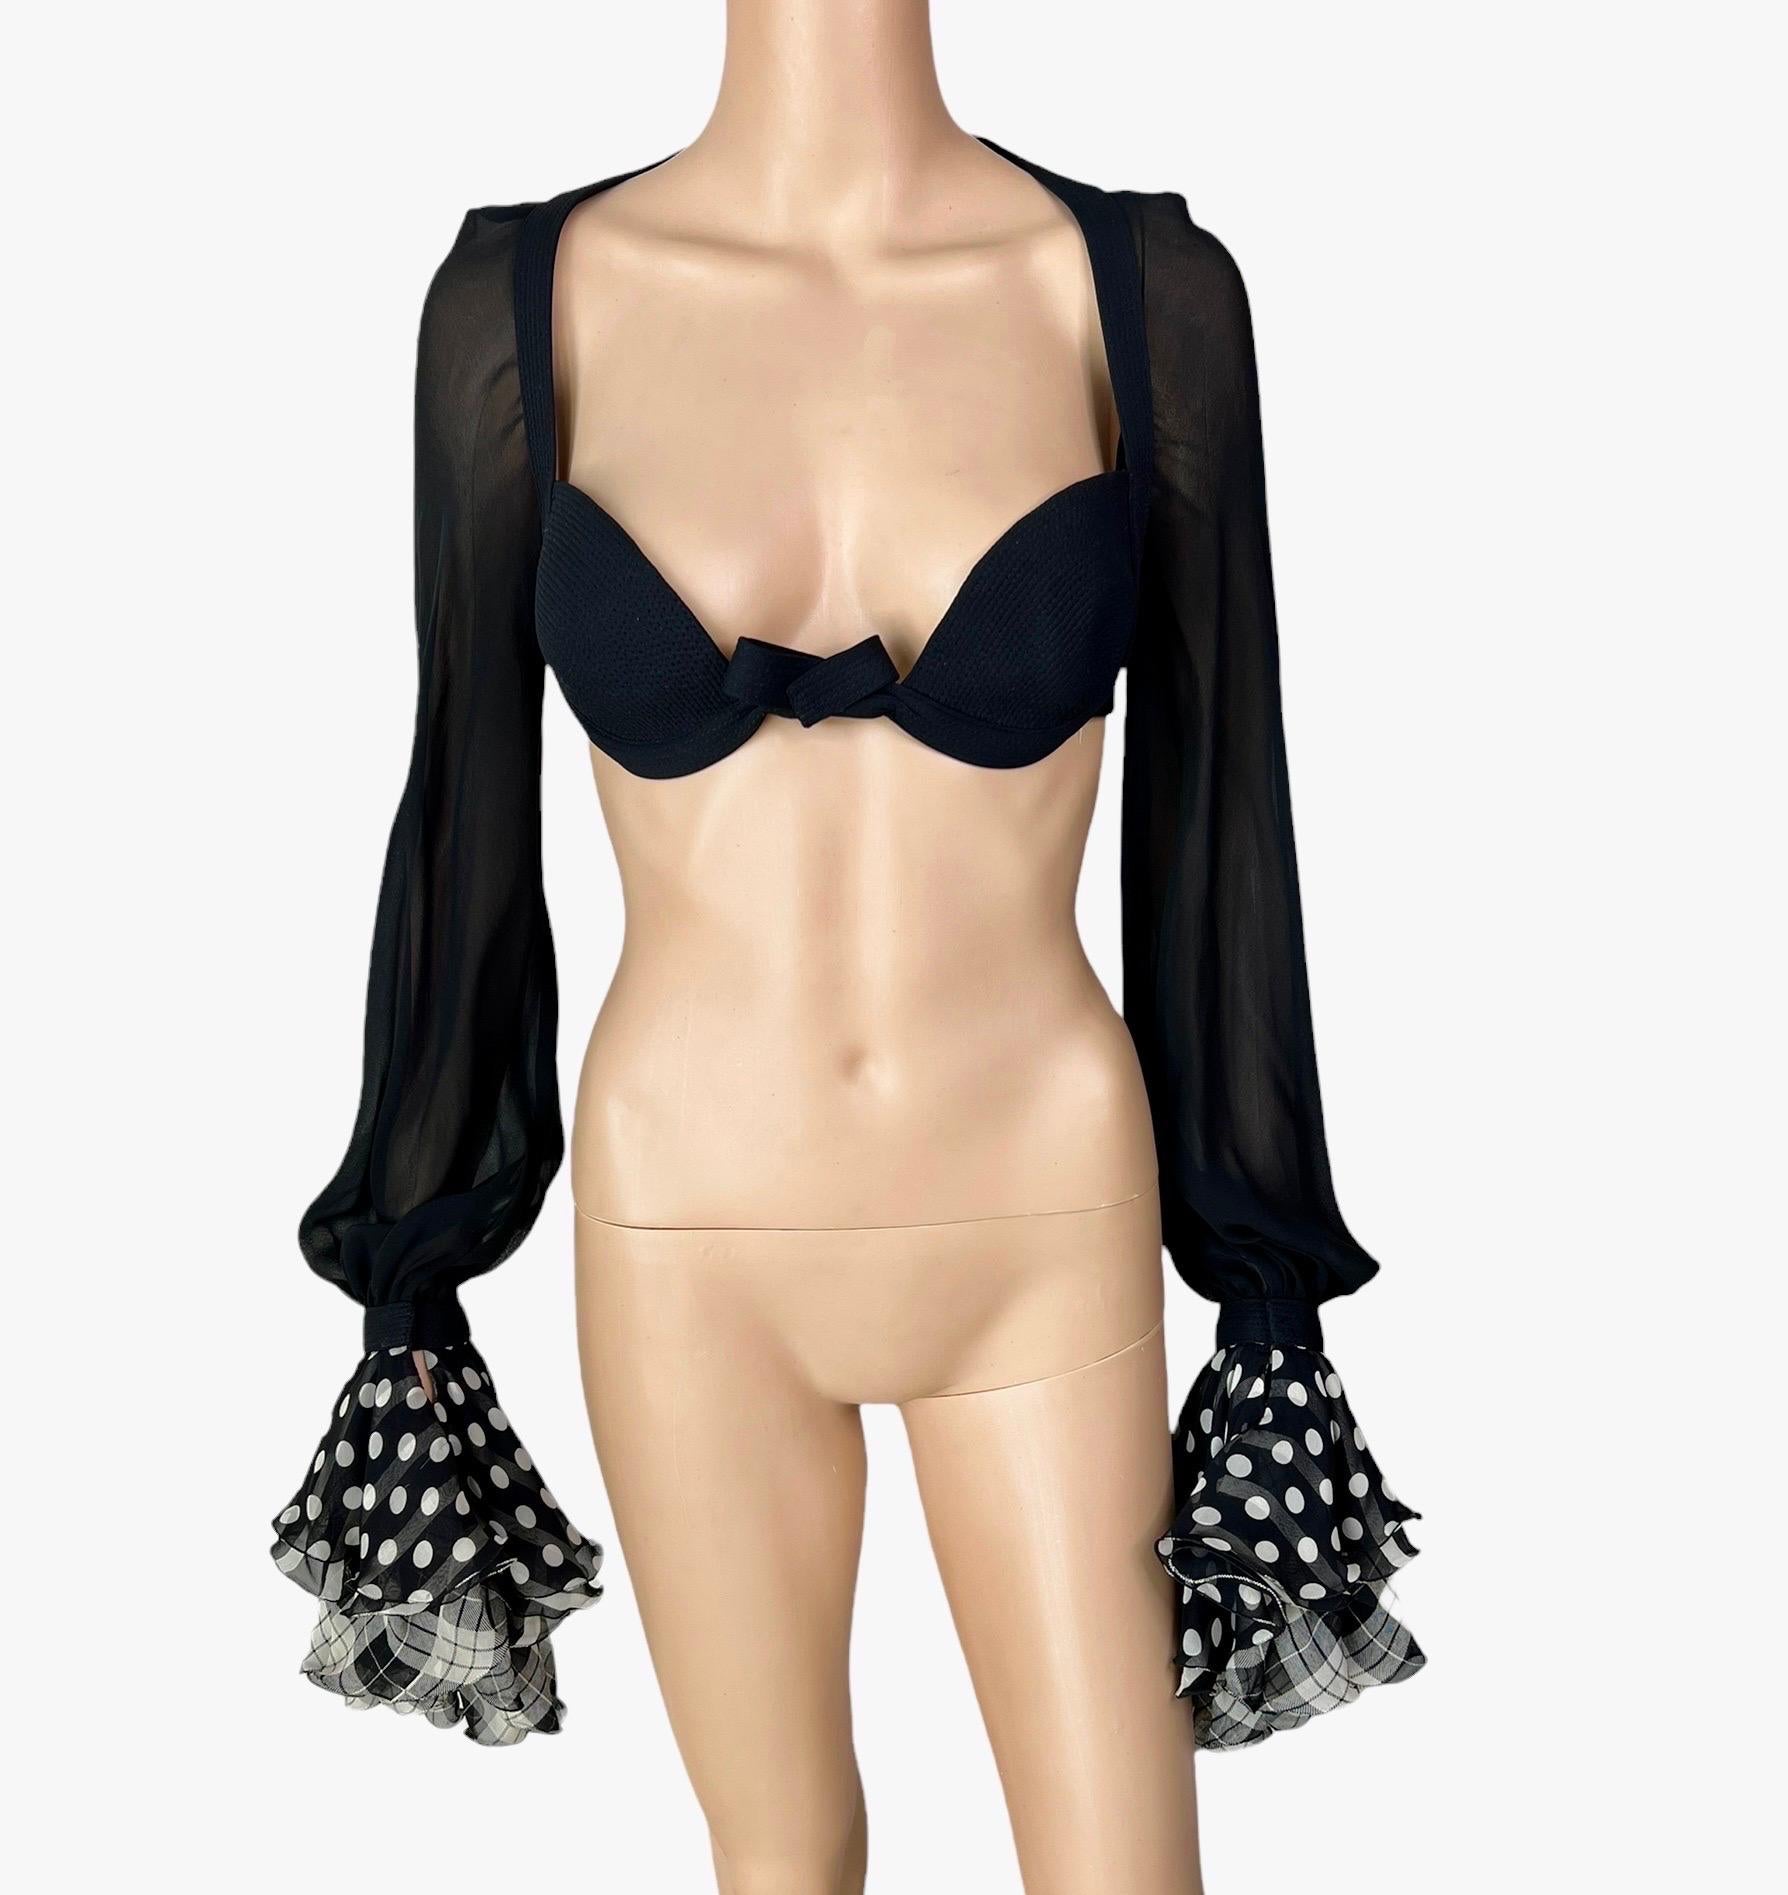 Gianni Versace S/S 1993 Runway Bra Bralette Sheer Silk Black Blouse Crop Top 

Look 52 from the Spring 1993 Collection.

Please note size tag is missing.